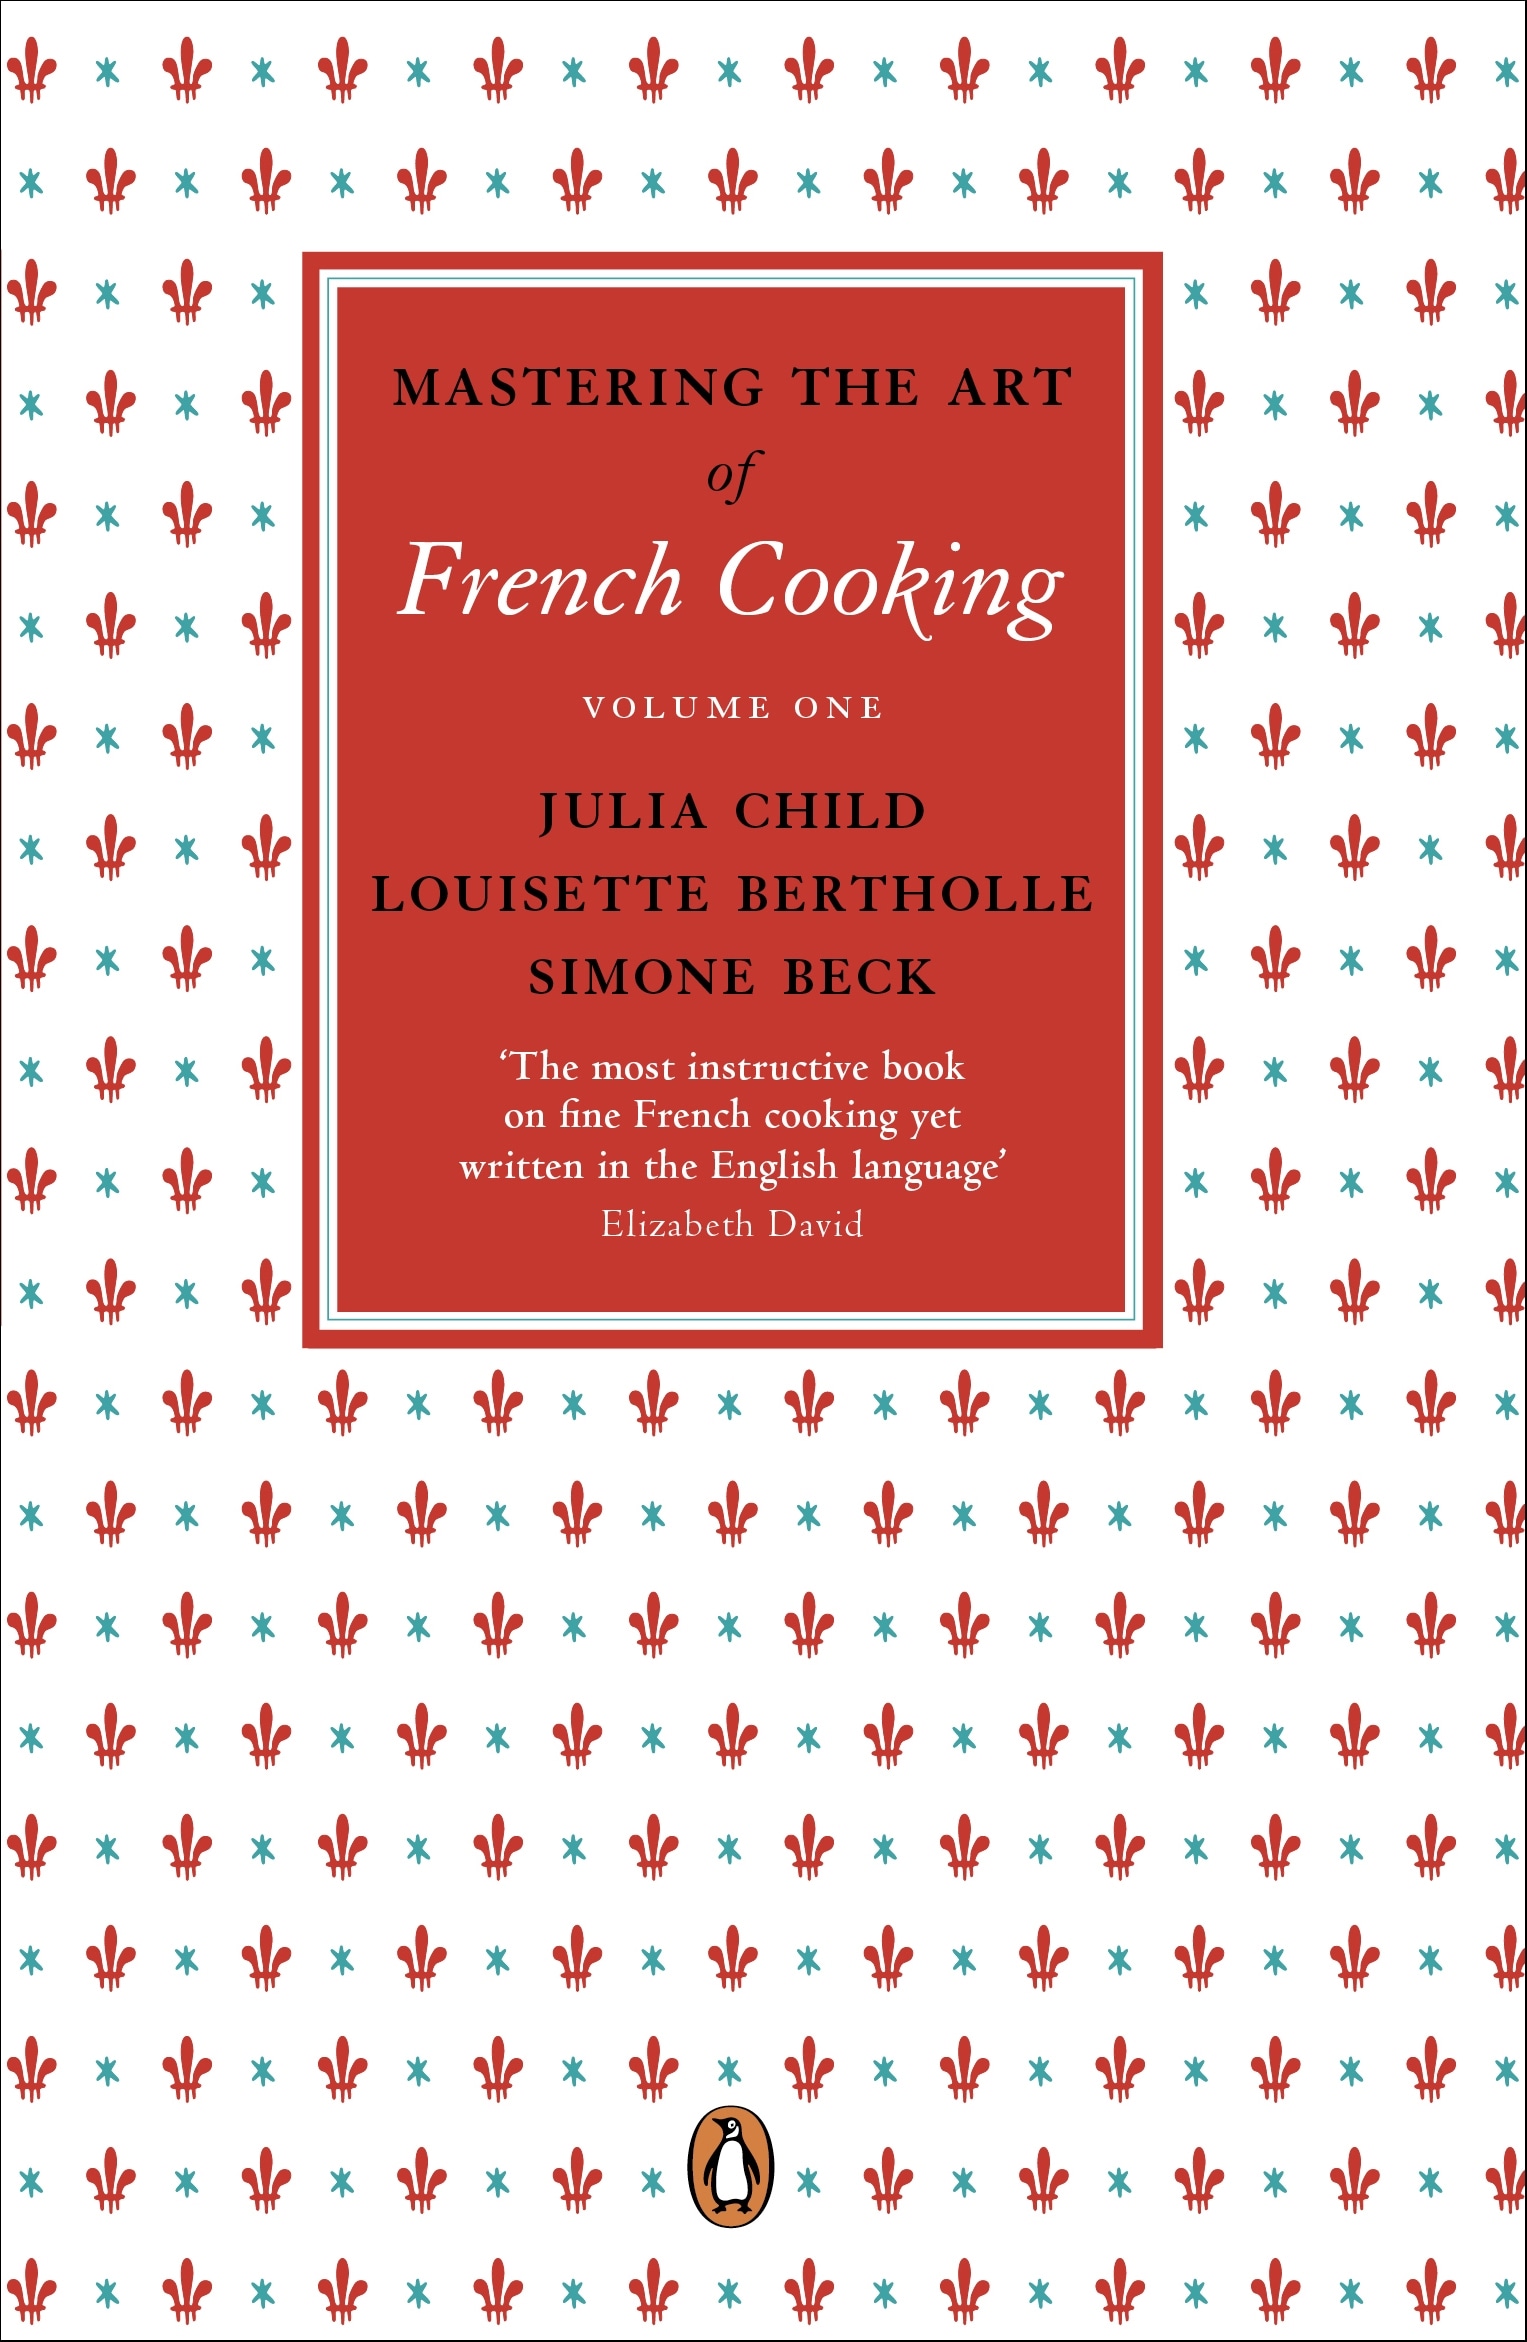 Book “Mastering the Art of French Cooking, Vol.1” by Julia Child — November 24, 2011